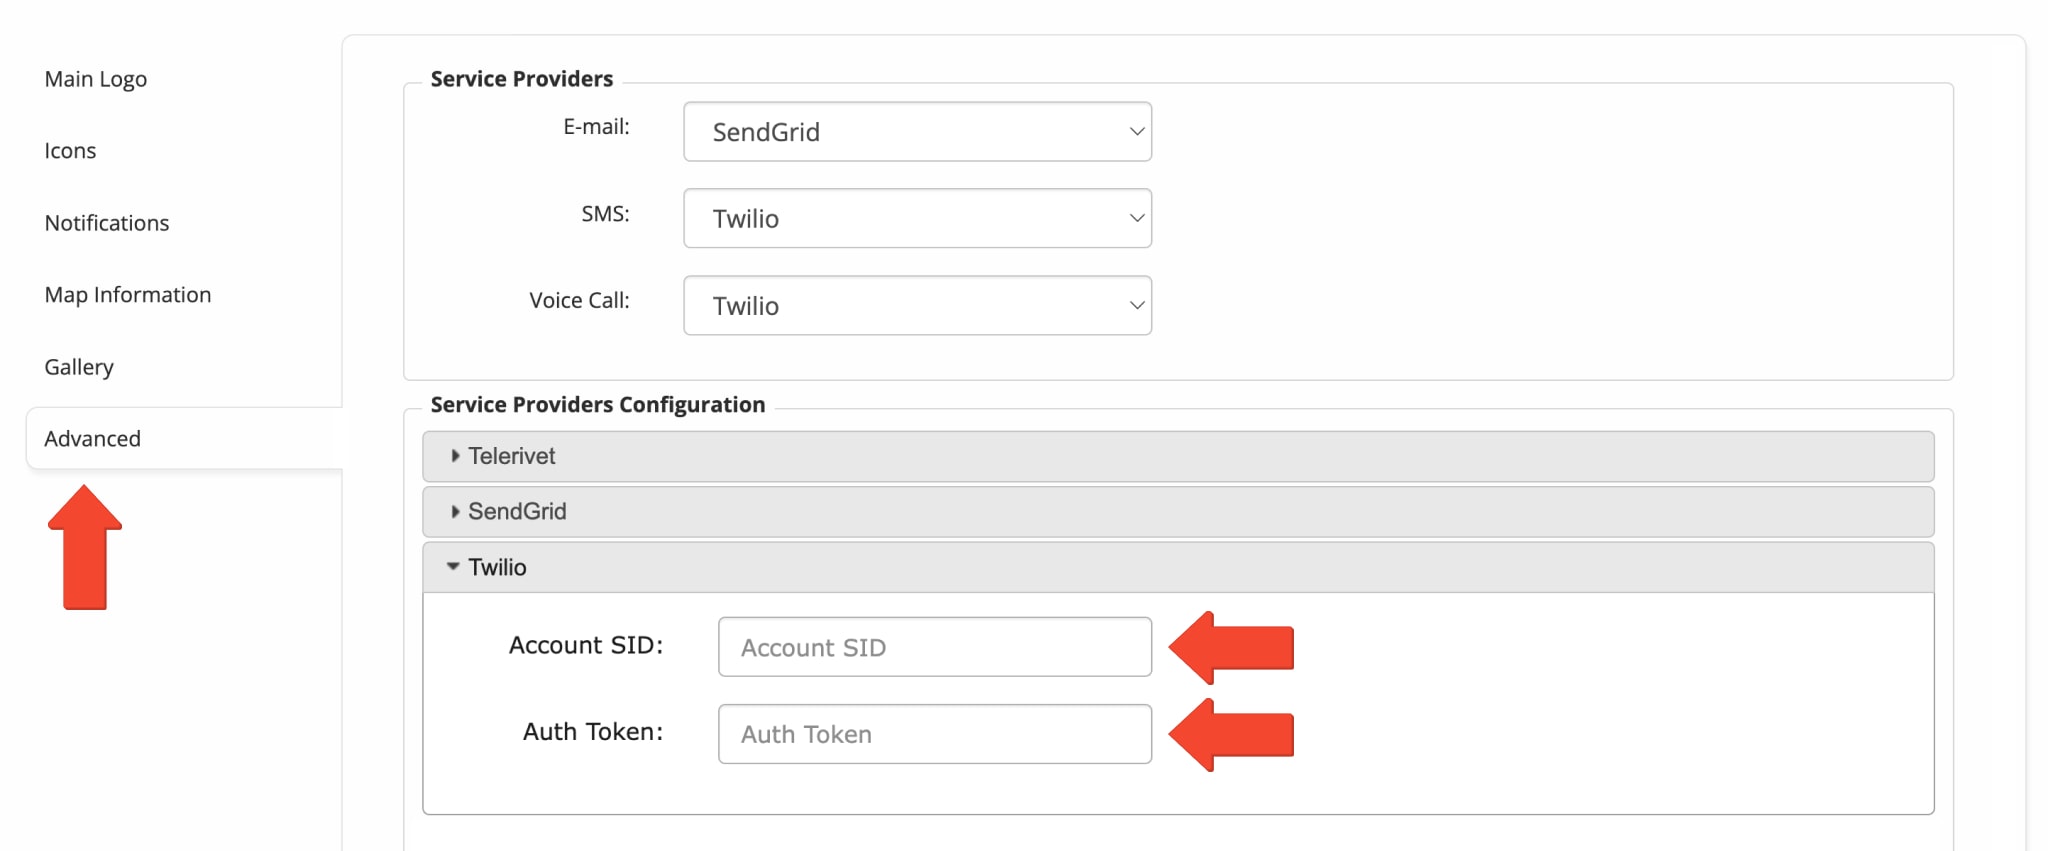 Make sure that the Twilio Account SID and Twilio Auth Token credentials are either valid or empty.